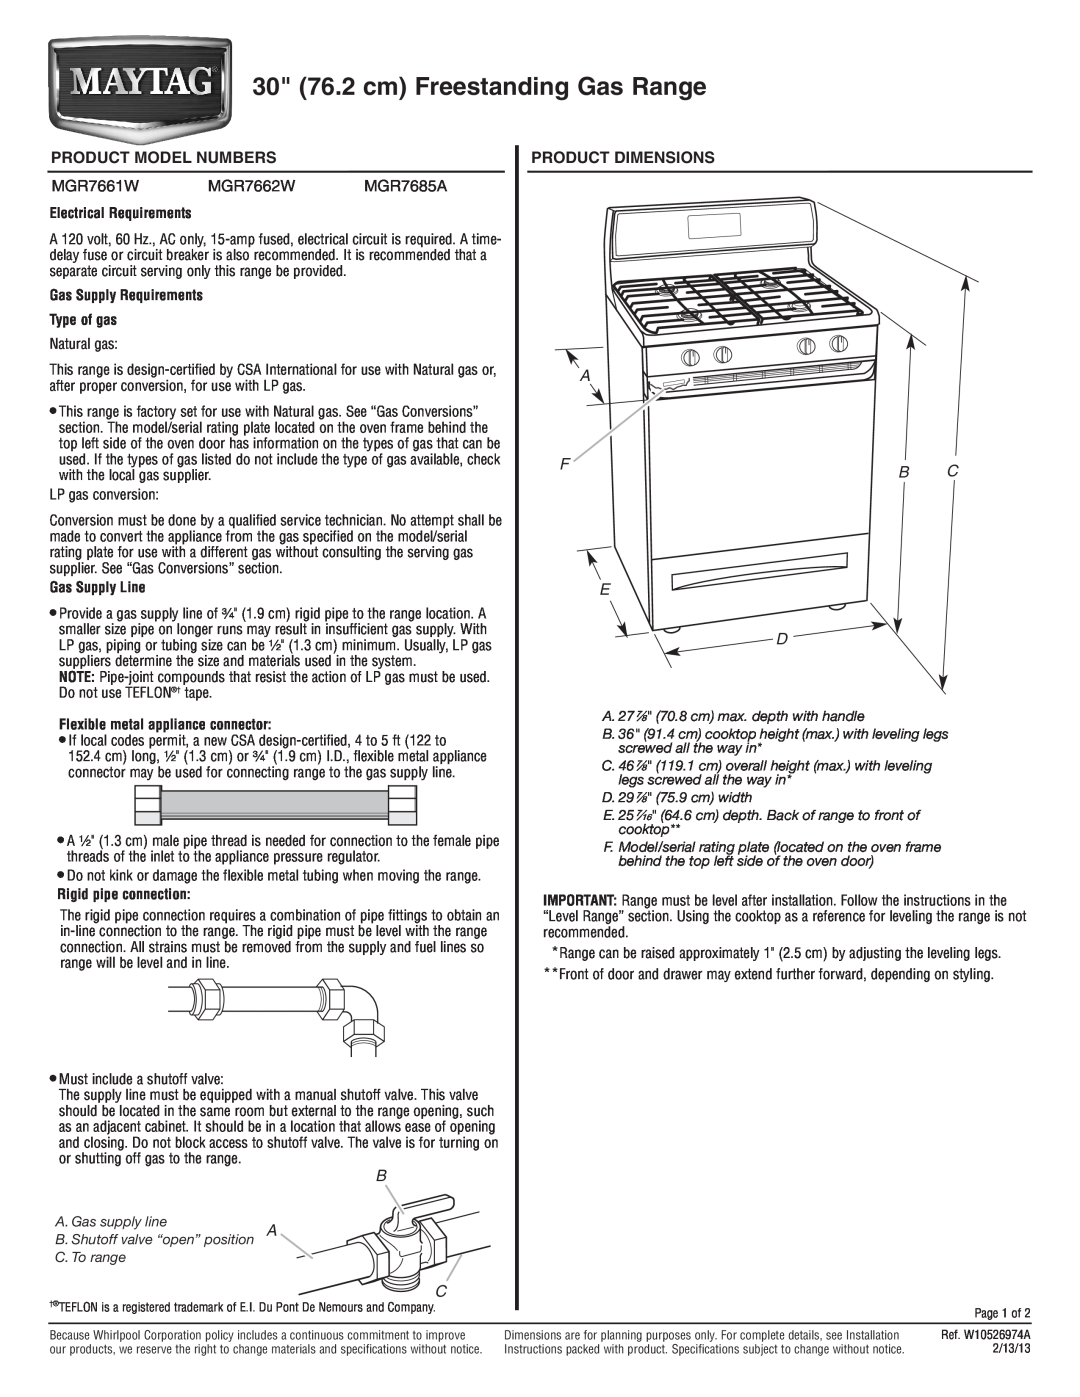 Maytag MGR7662W dimensions Product Model Numbers, Product Dimensions, 30 76.2 cm Freestanding Gas Range, MGR7661W 